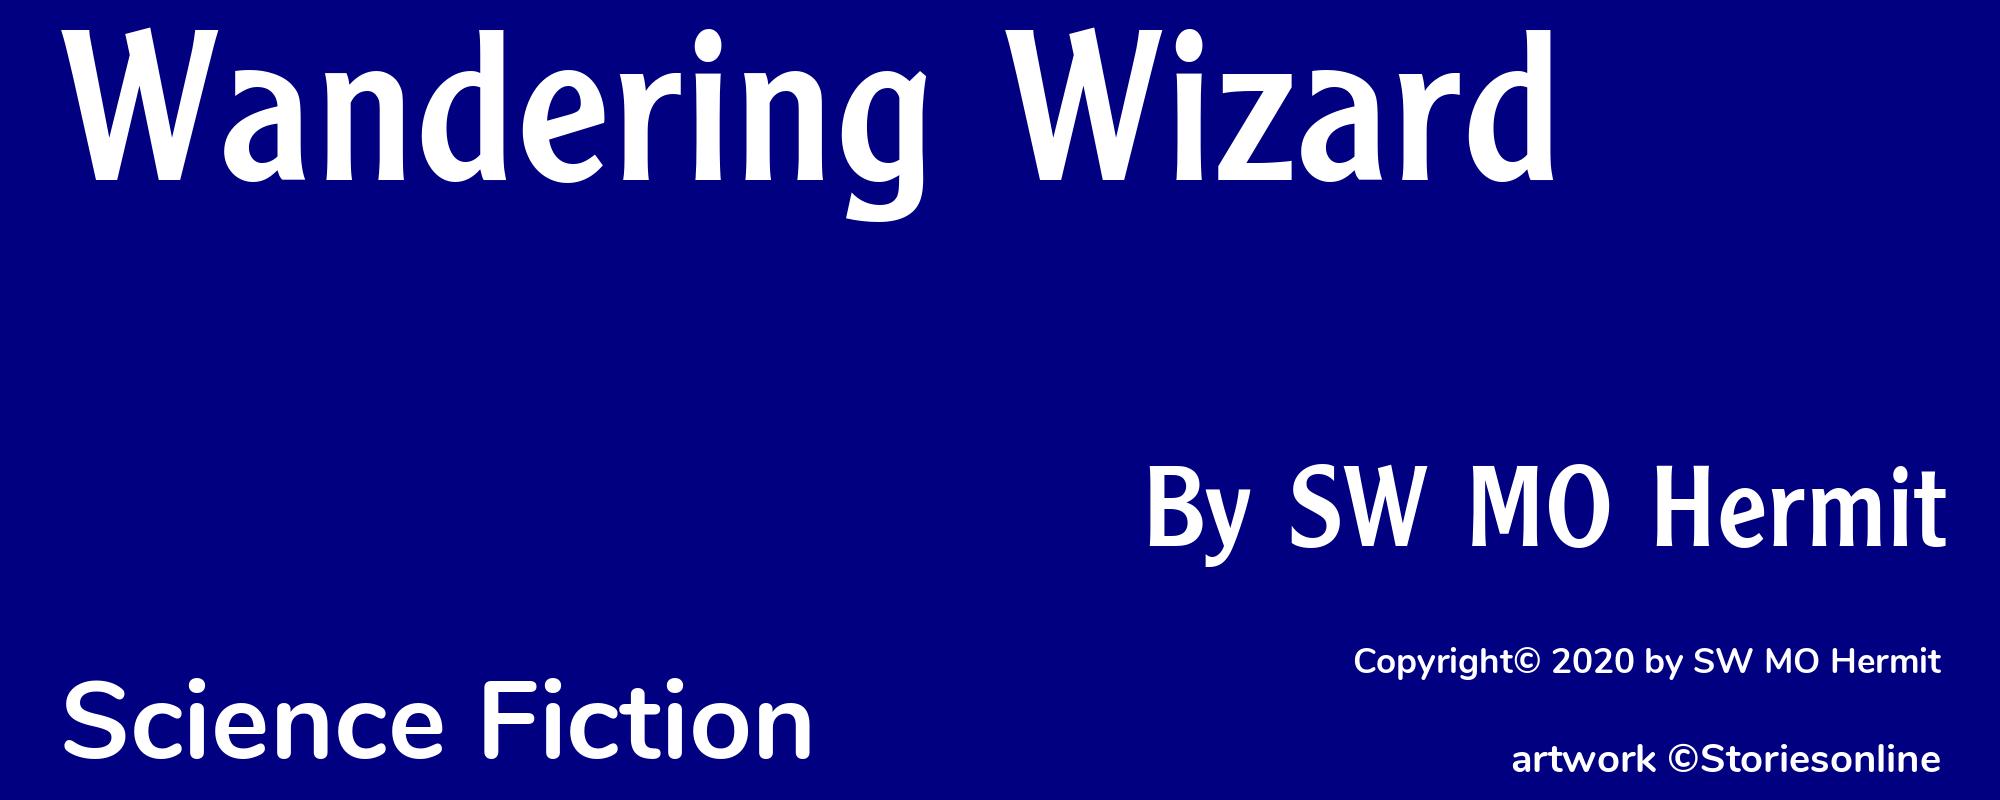 Wandering Wizard - Cover